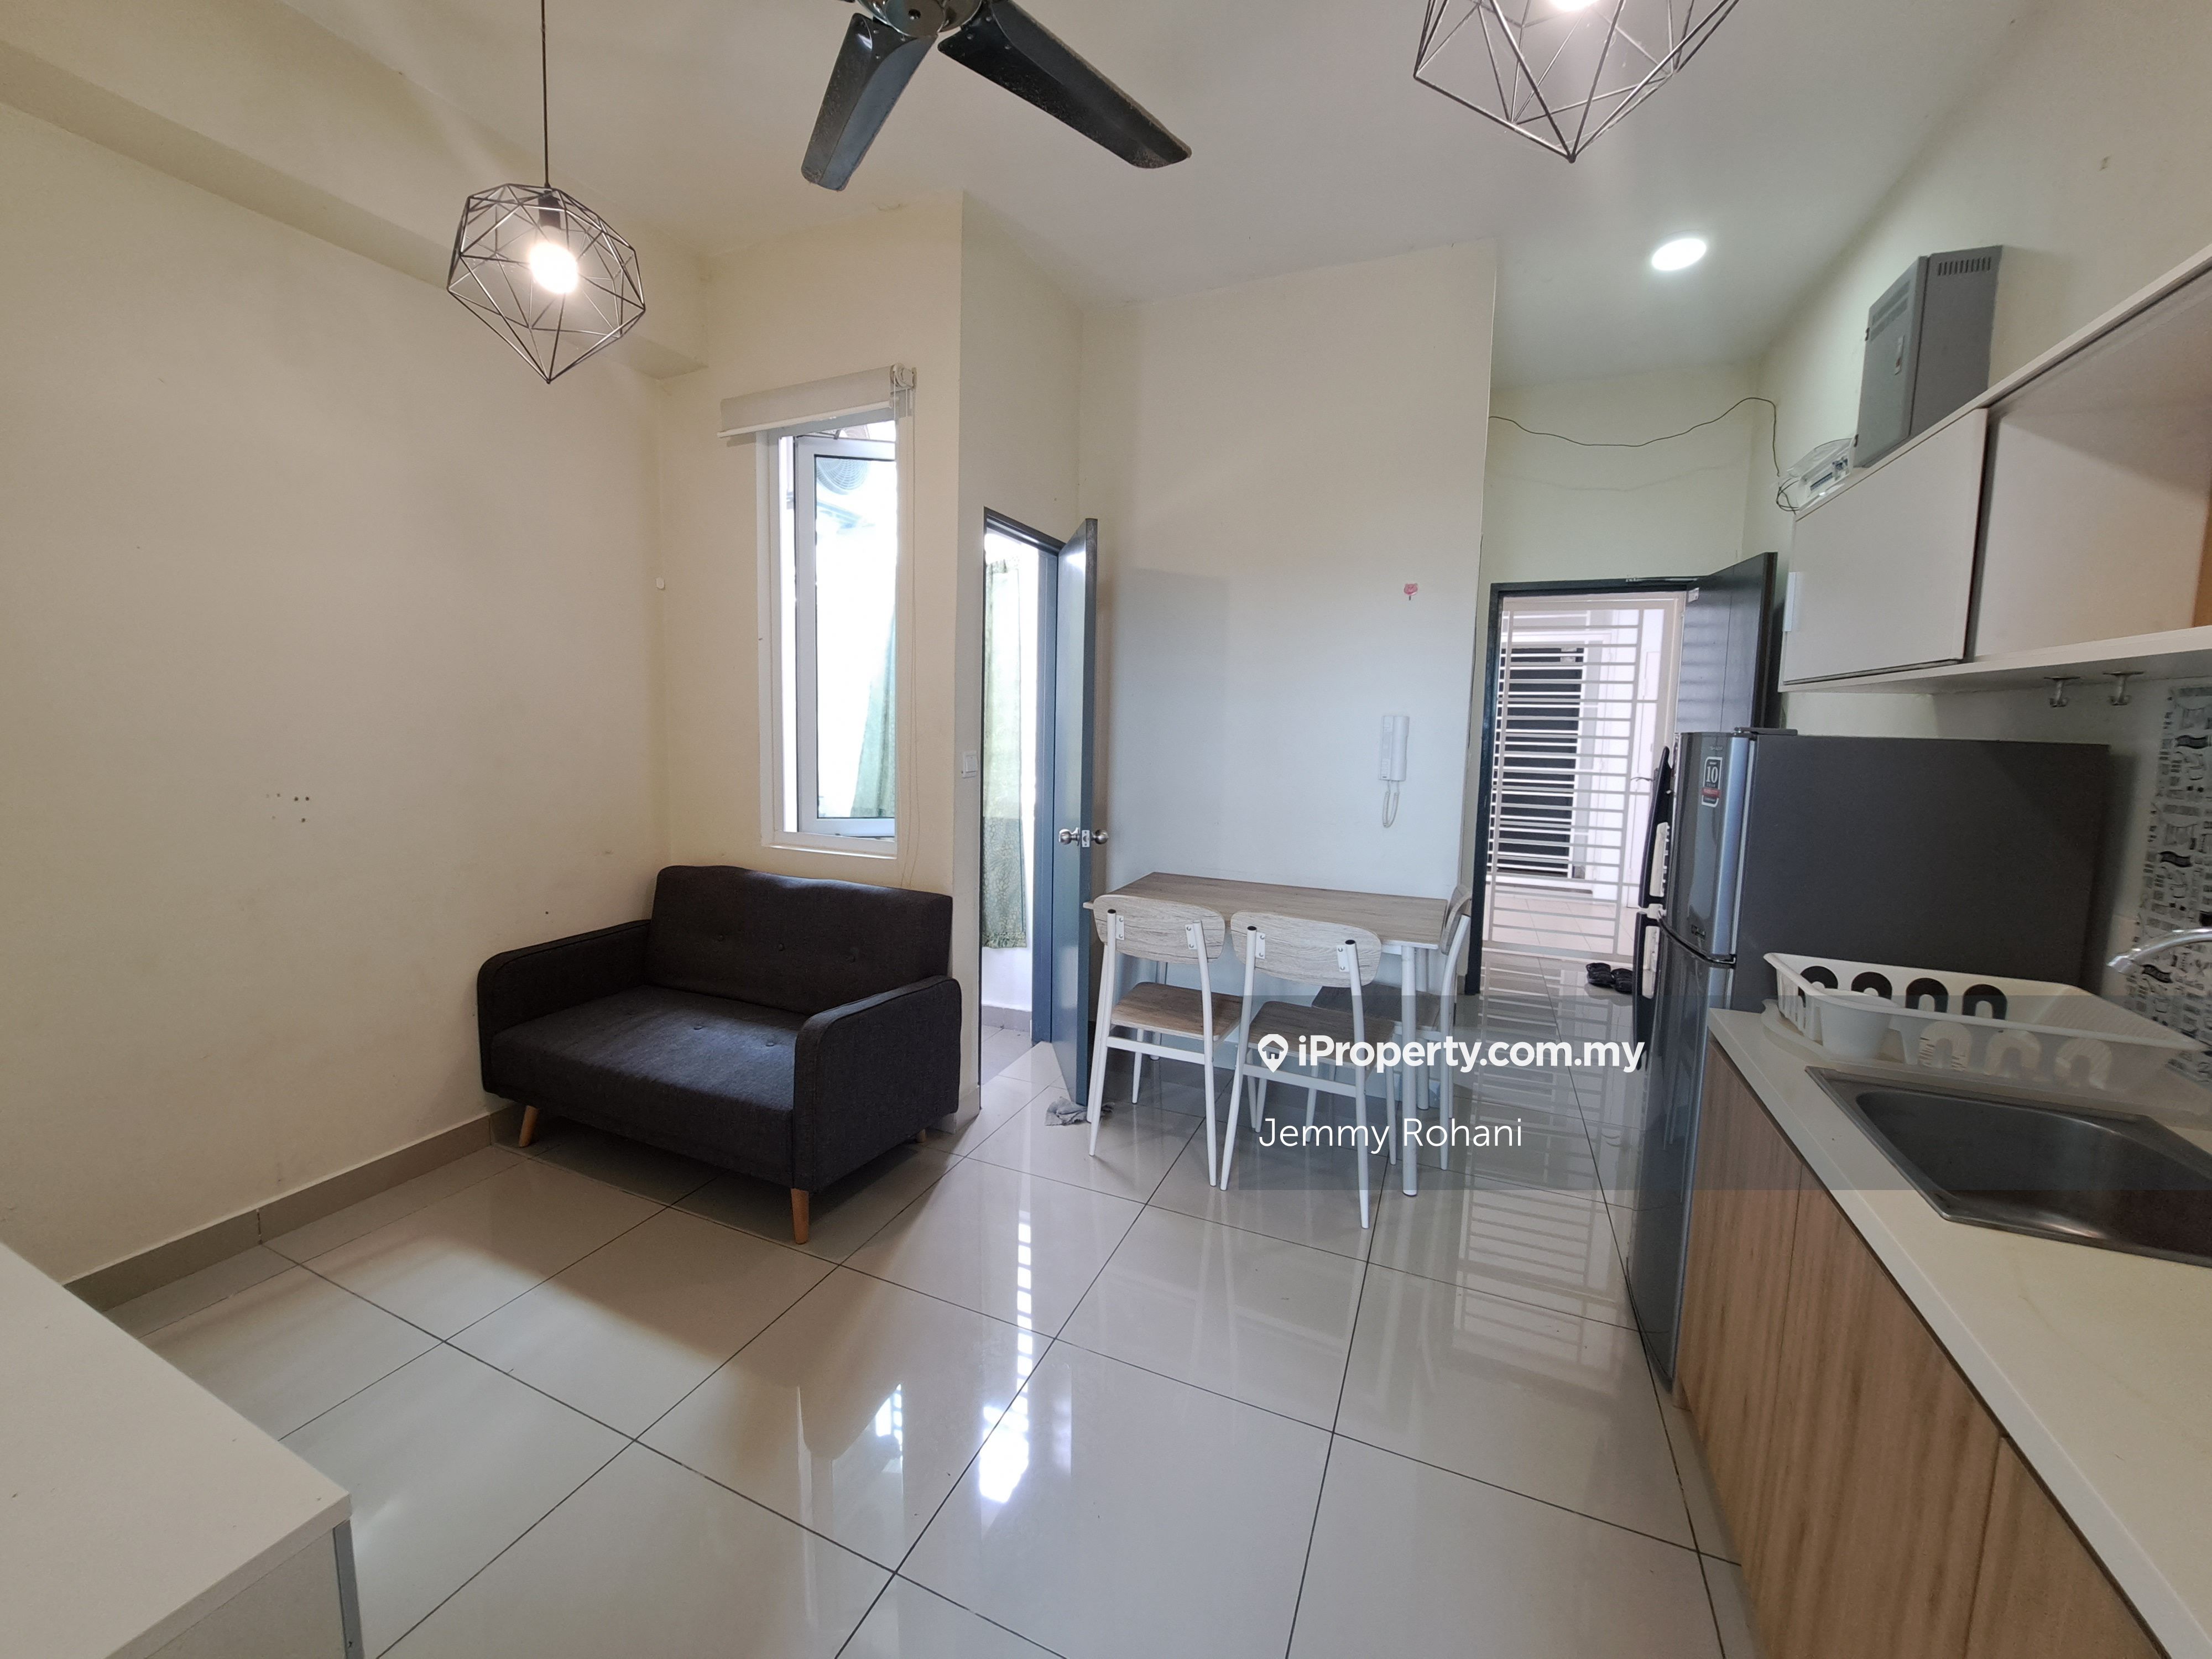 Mesahill Intermediate Serviced Residence 1 bedroom for rent in Nilai ...